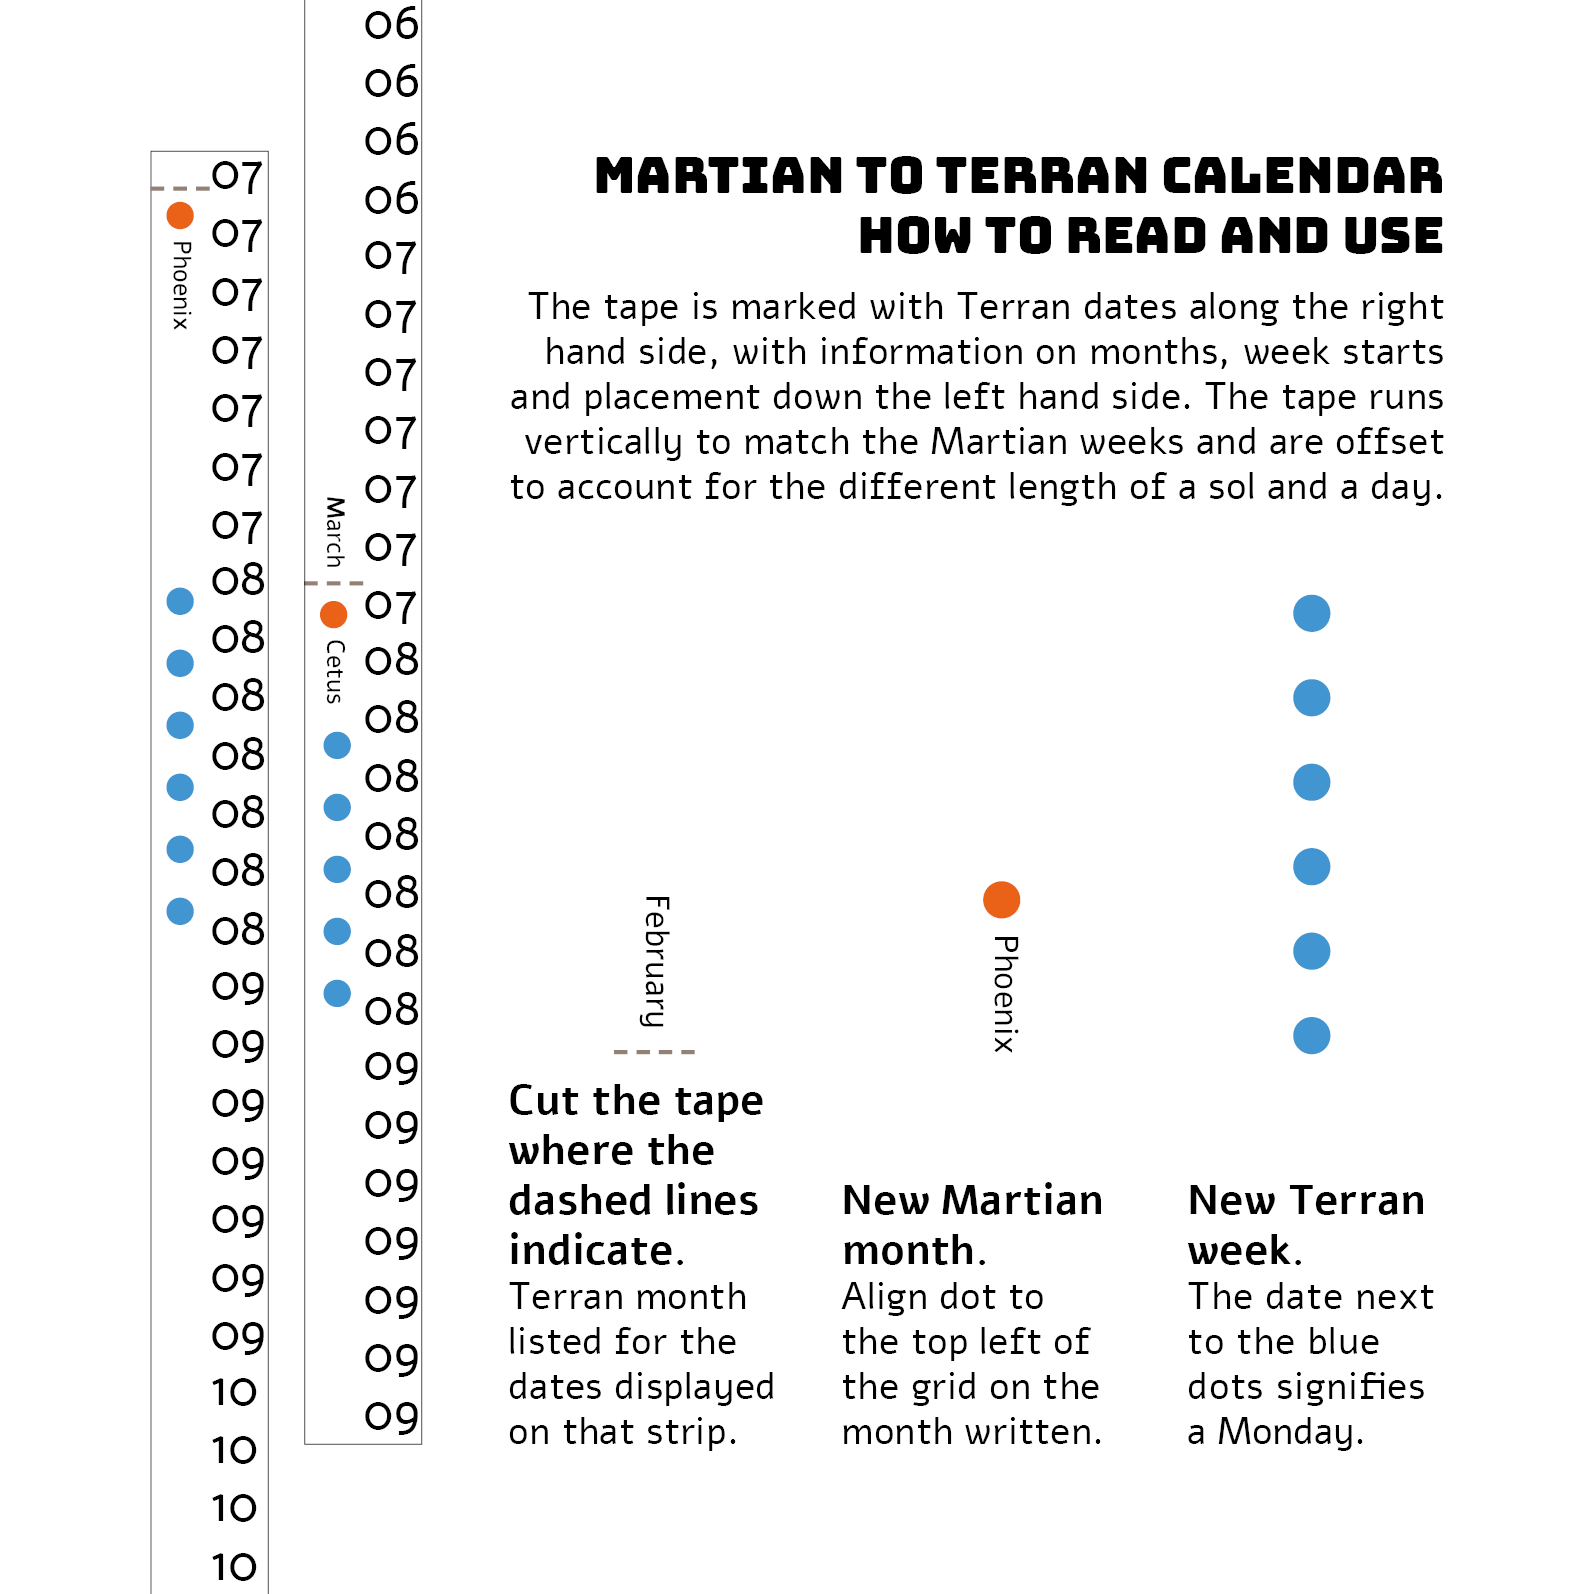 Titled 'Martian to Terran Calendar, how to read and use. To the left of the image is a strip of tape with numbers running down the right and blue and orange dots on the left. To the right is a key describing the orange dots and new martian months, blue dots as new terran weeks and dotted lines as cut lines.